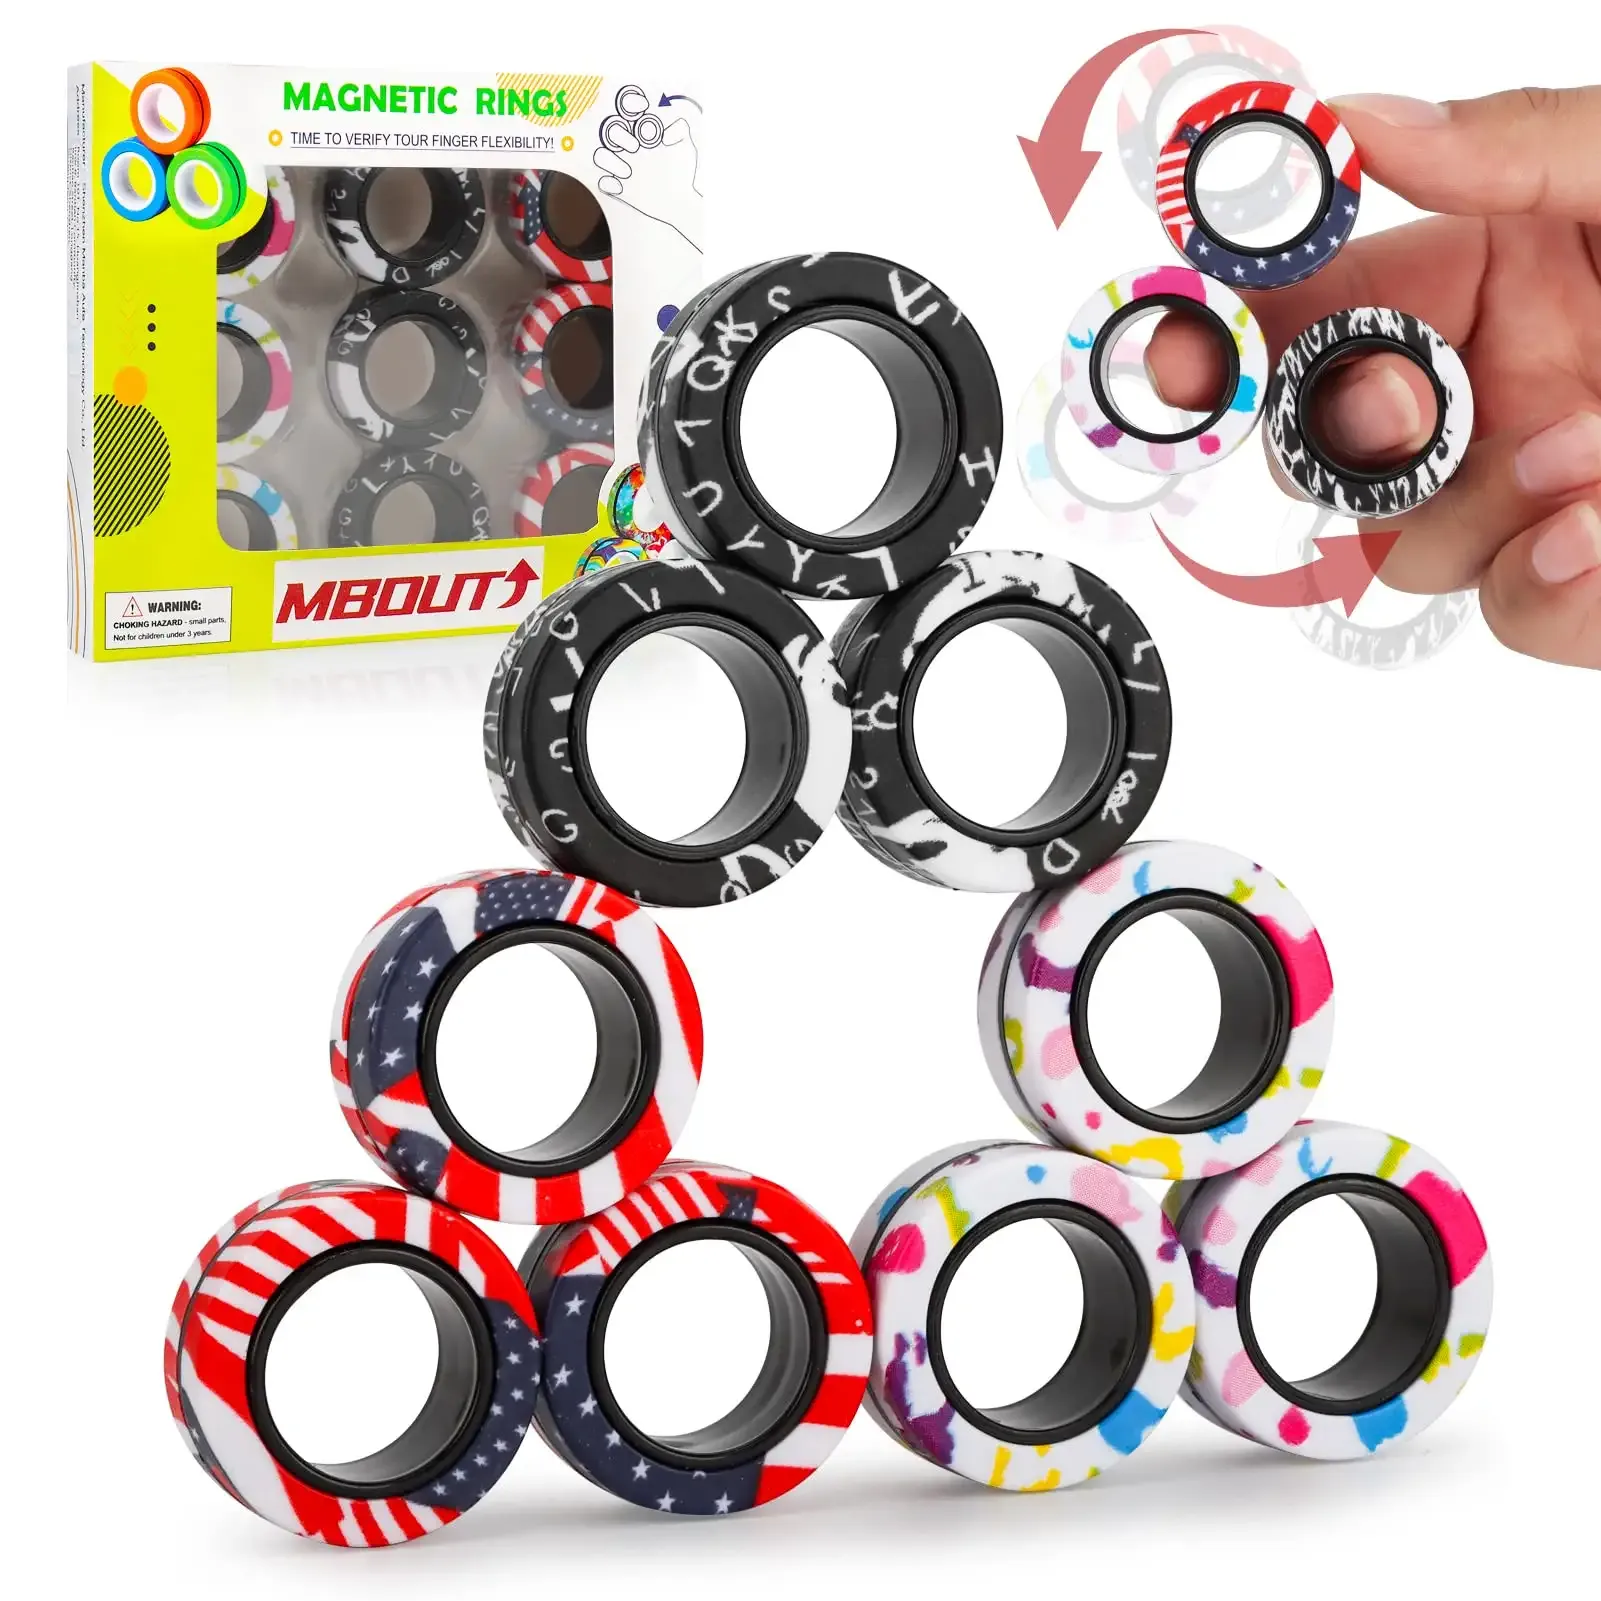 magnetic rings fidget toy set idea adhd anxiety decompression magnetic fidget toys adult fidget spinner rings for relief finger fidget toys gifts for 8 9 10 11 12 13add year old boy girl teen